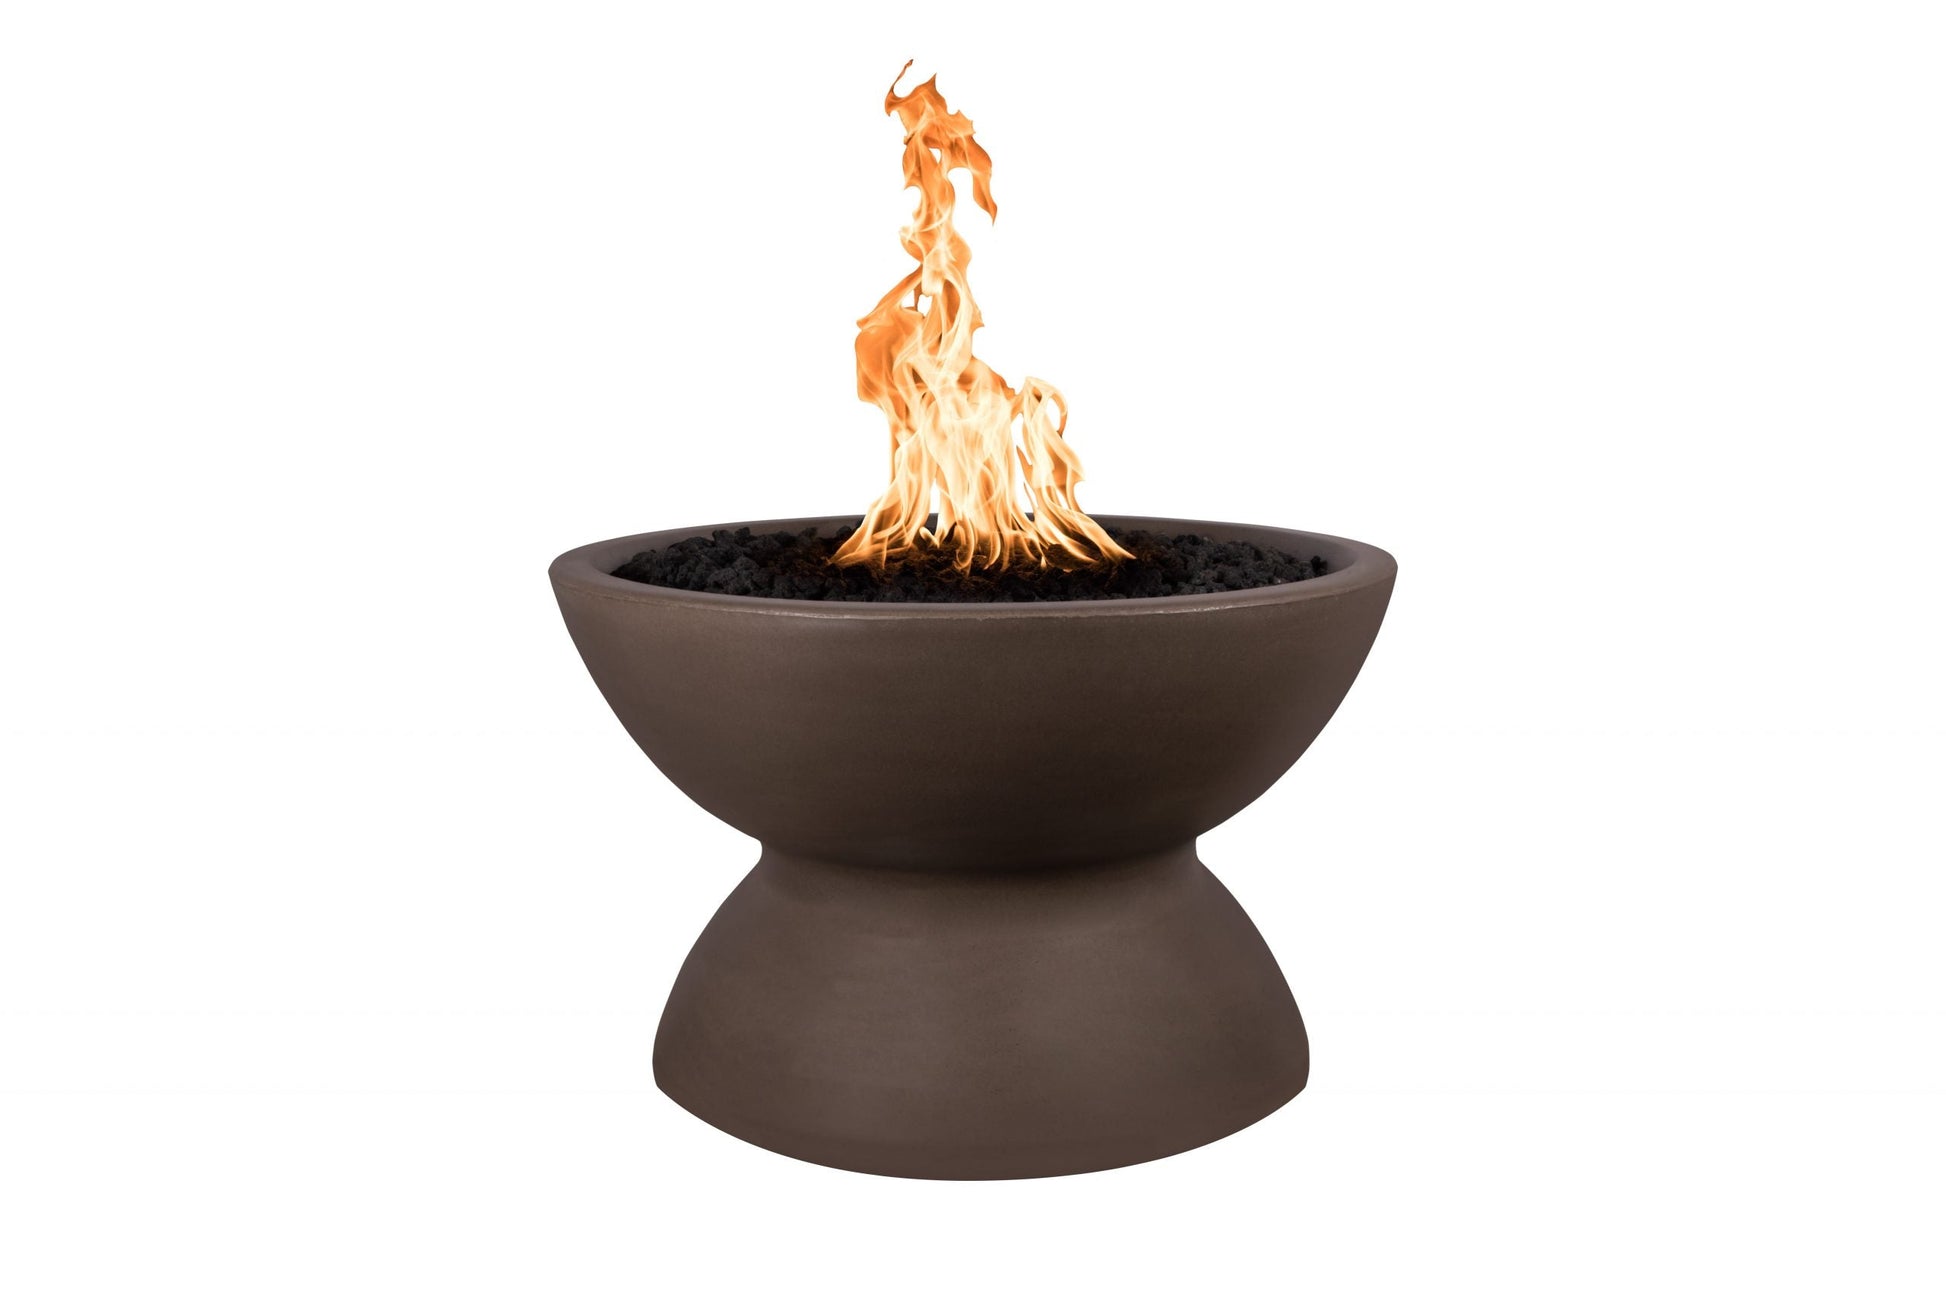 The Outdoor Plus Round Copa 33" Ash GFRC Concrete Natural Gas Fire Pit with Match Lit Ignition